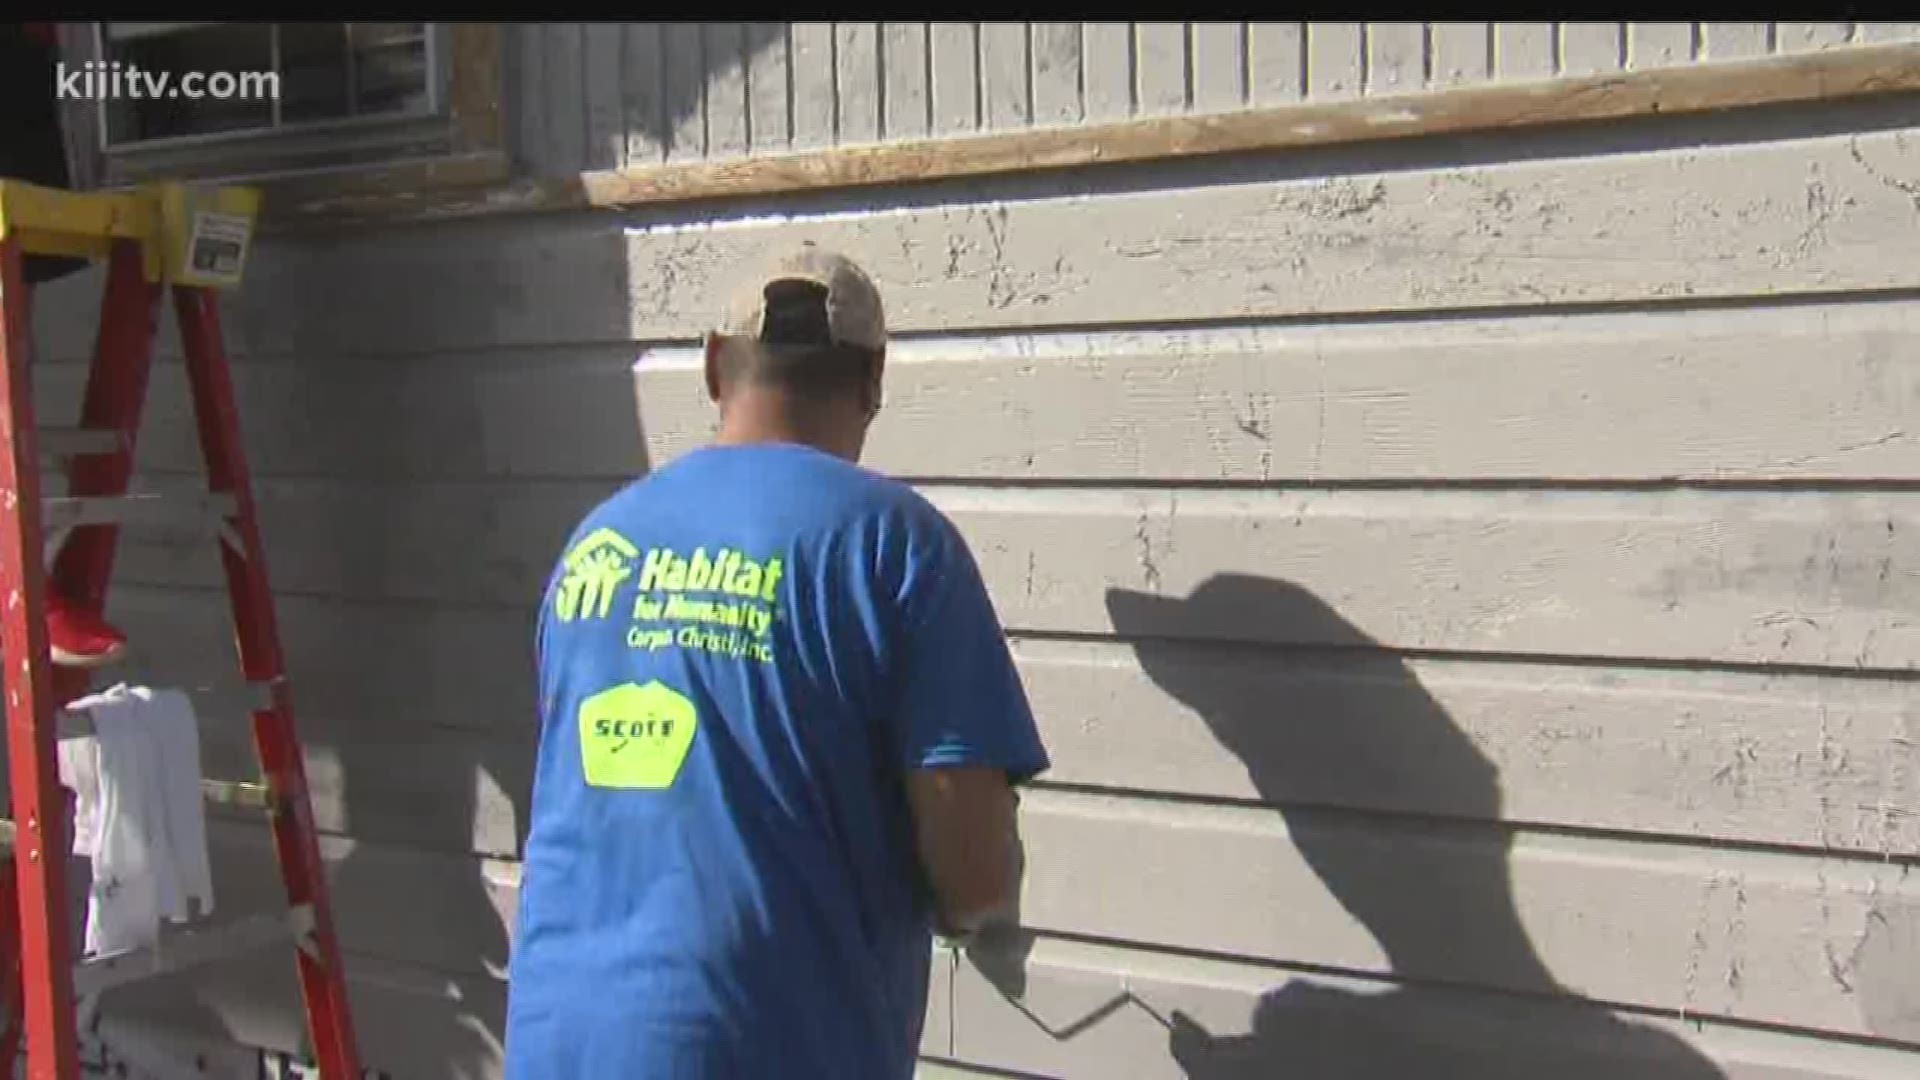 Not just building a house, but creating a home - that's what one Corpus Christi man has been doing with his carpentry skills for the Habitat for Humanity organization.